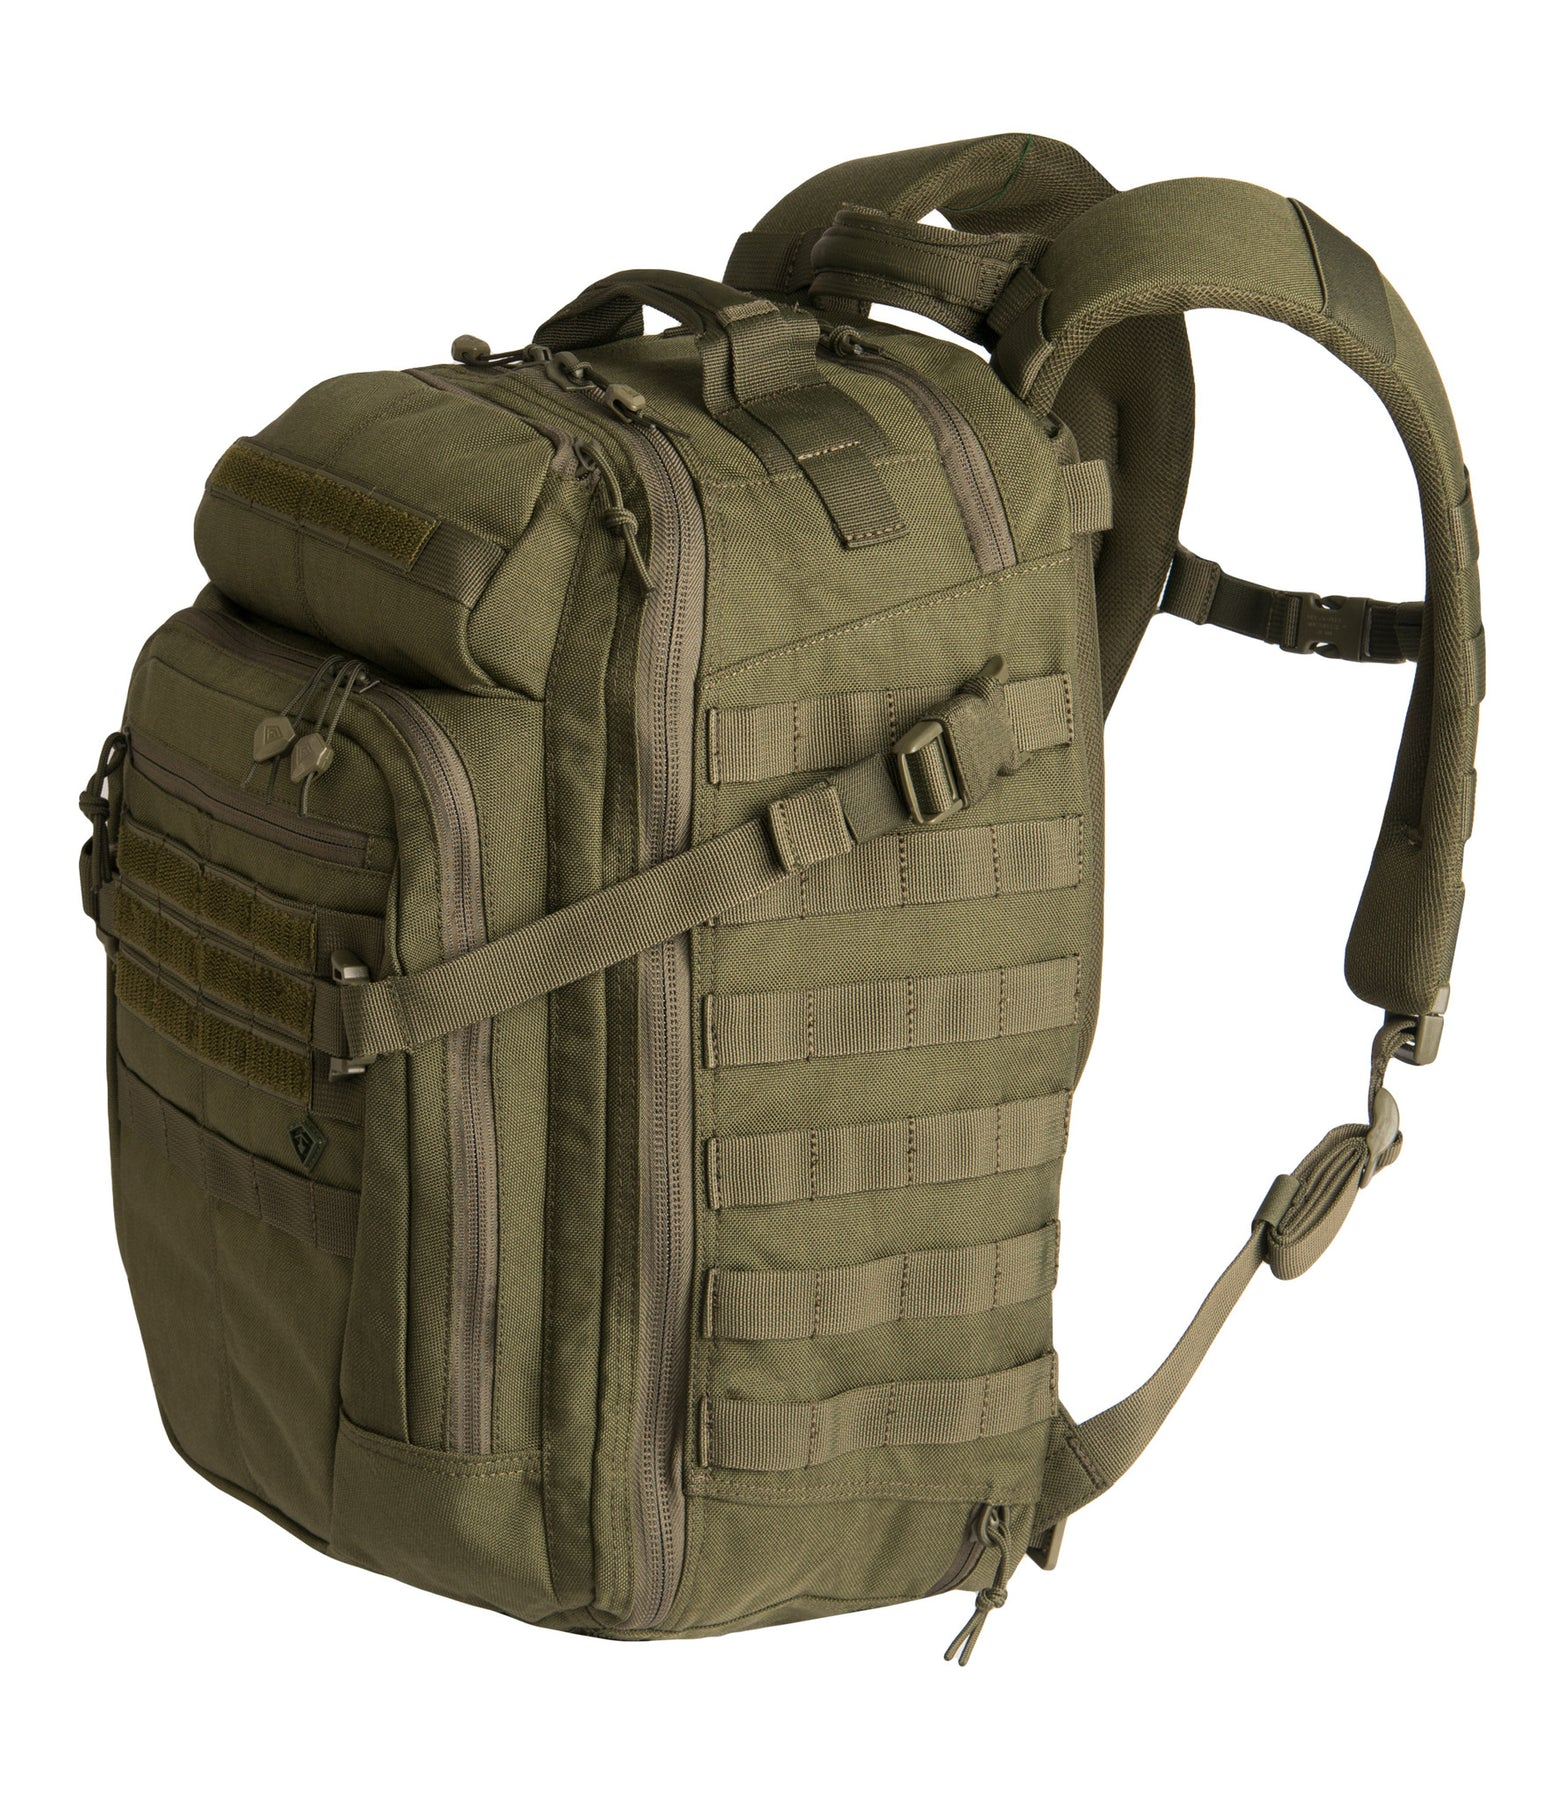 First Tactical Specialist BackPack 0.5D 25L 180006 - OD Green